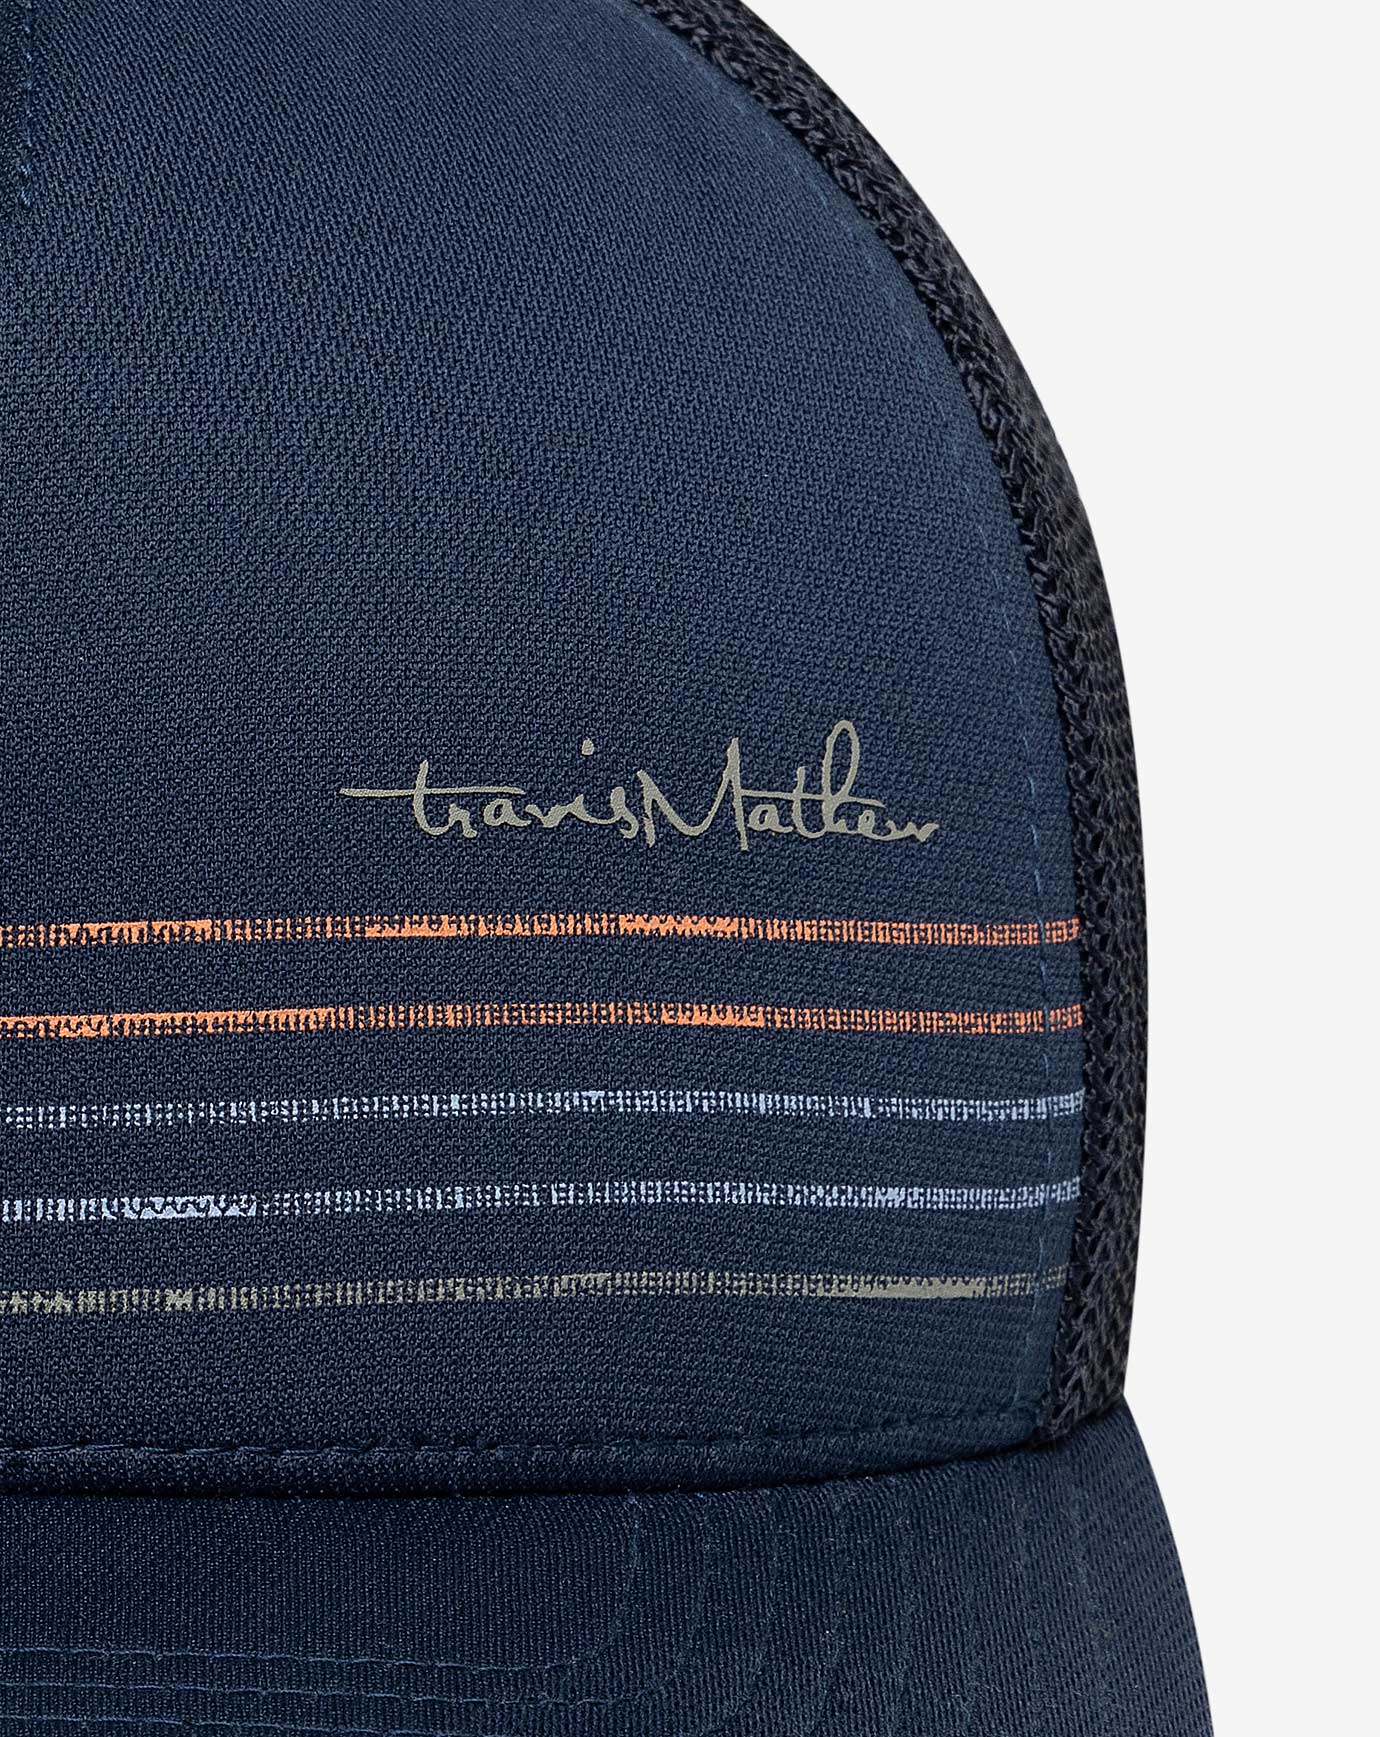 With textured half-panel striping and our classic script logo, the BUENOS DIAS mesh snapback hat delivers legendary style and comfort for the everyday. 